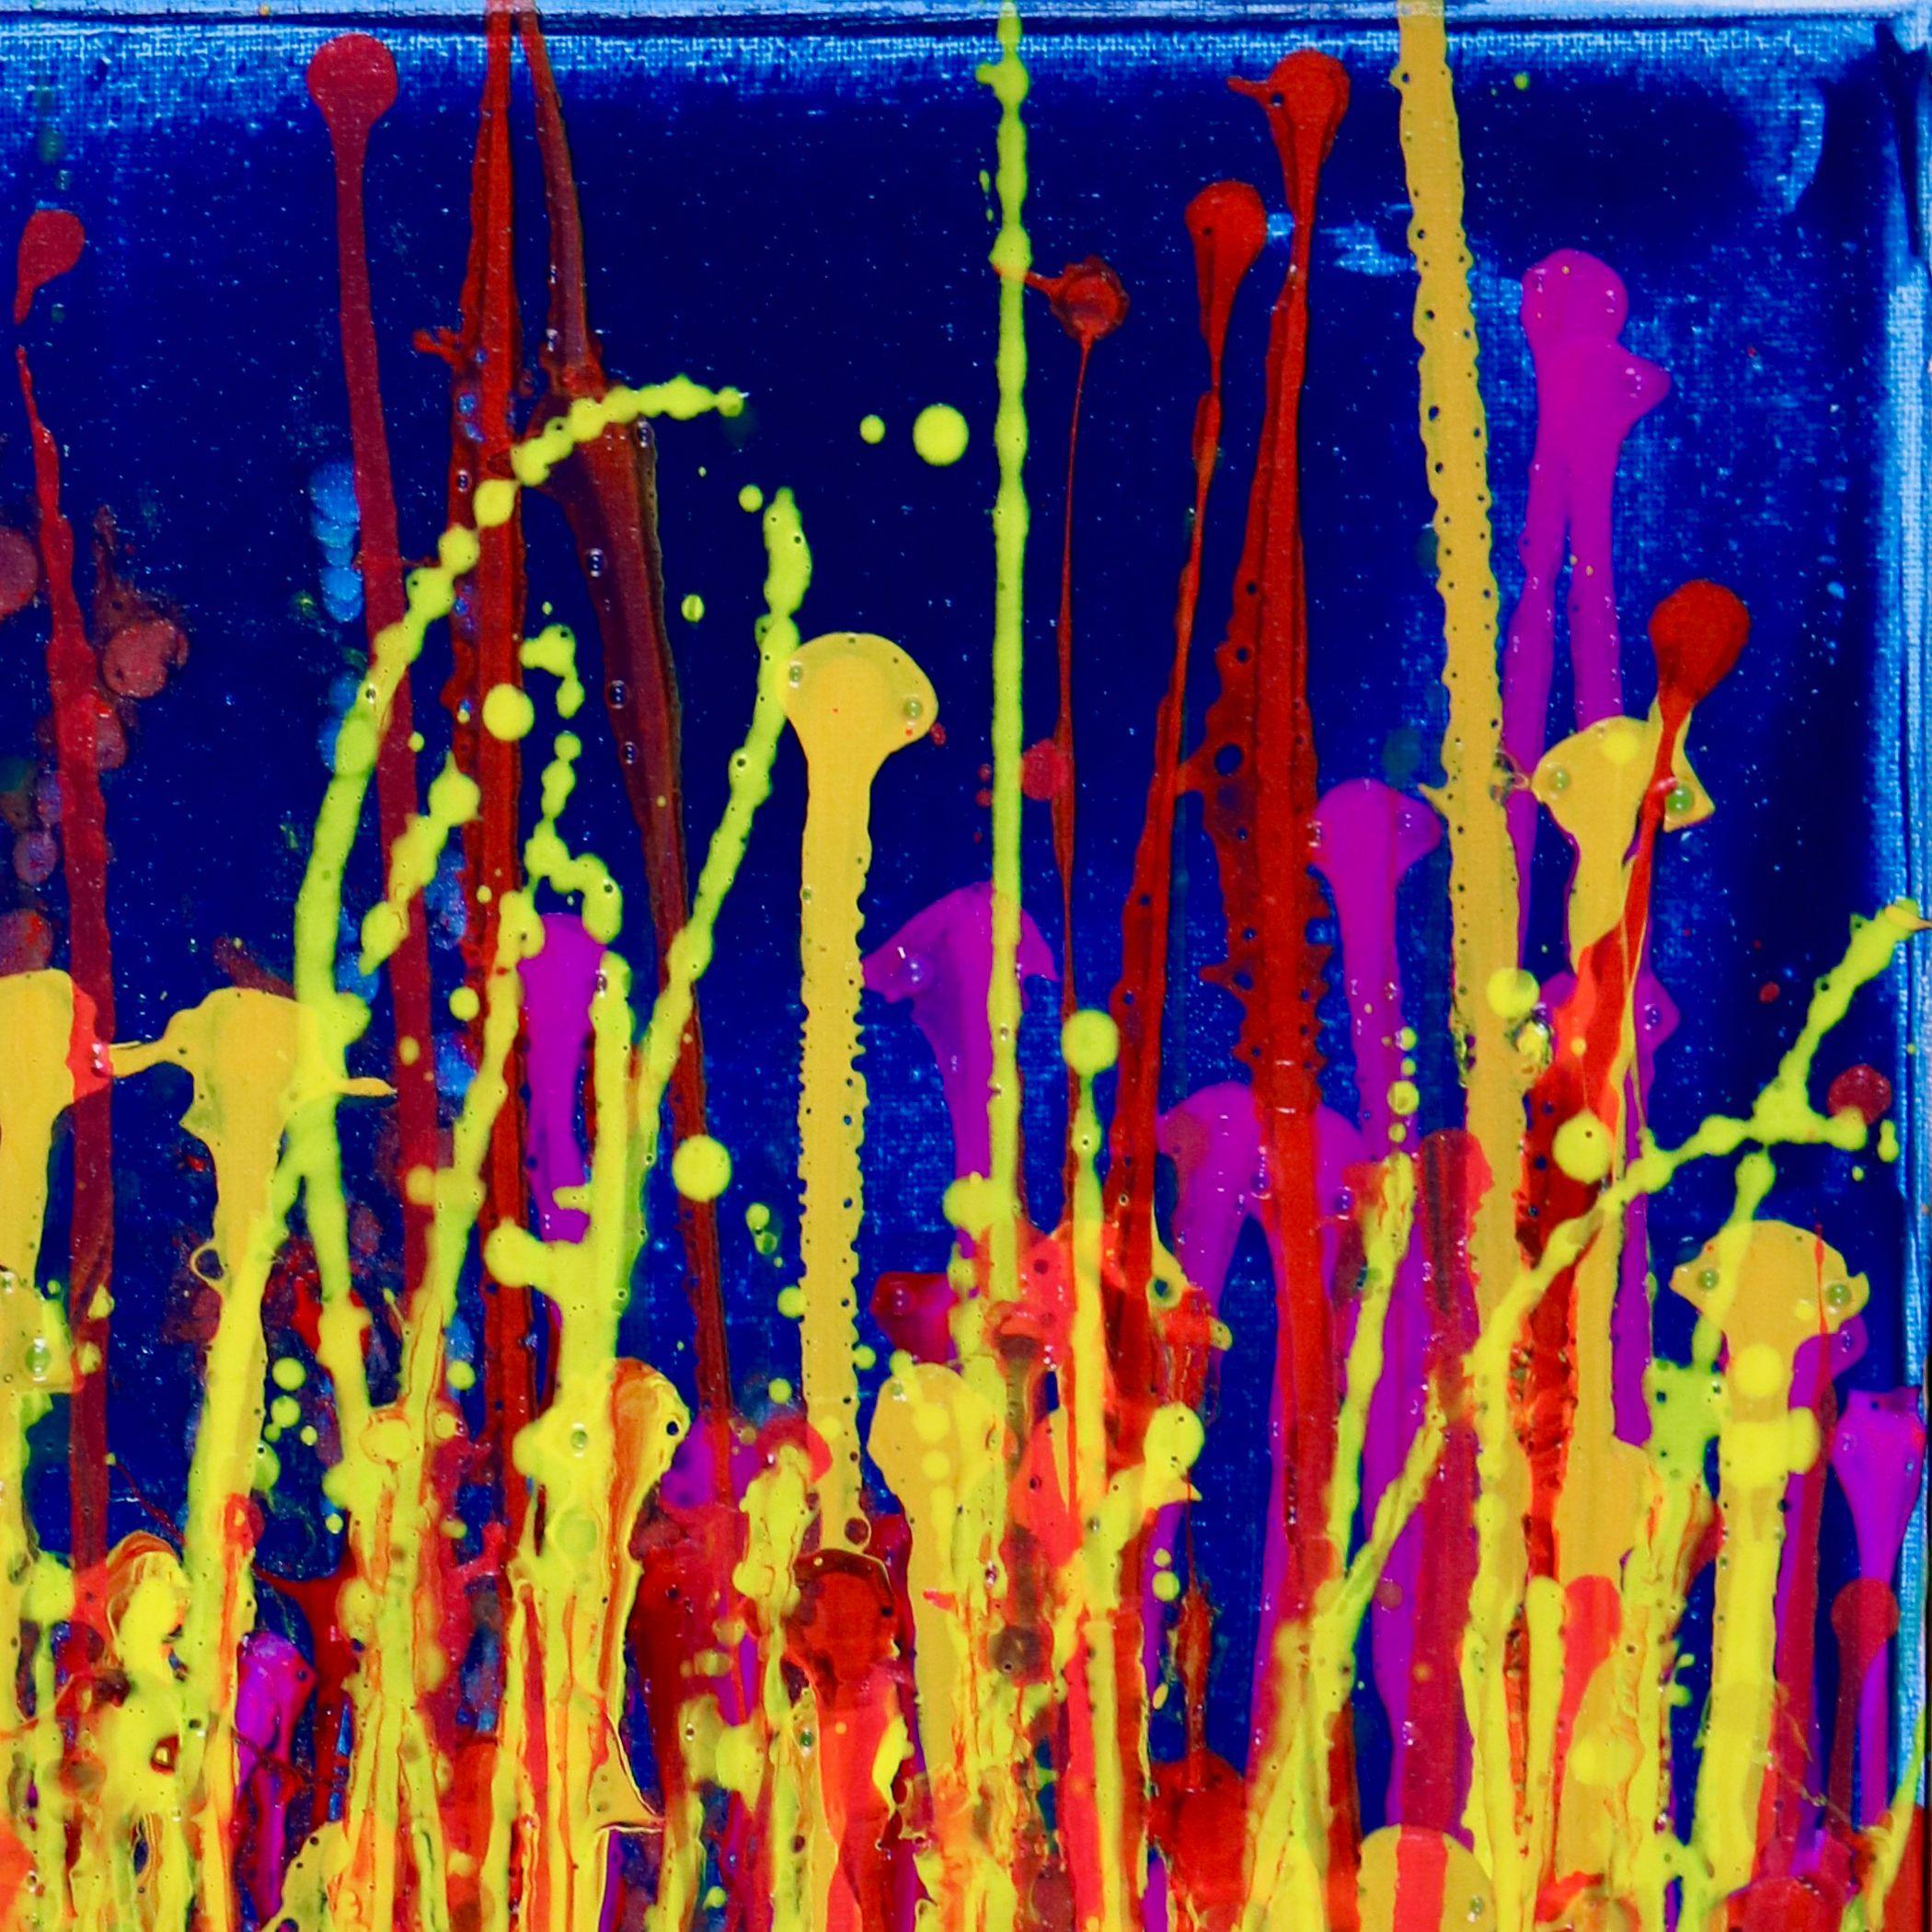 Three canvases 16 W x 20 H x 0.7 in each.  Acrylic on canvas    Three canvases16 W x 20 H x 0.7 in each. Expressive, bold full of live and shimmer! inspired by nature, many colors combined with mica particles. Red, yellow and purple over deep blue